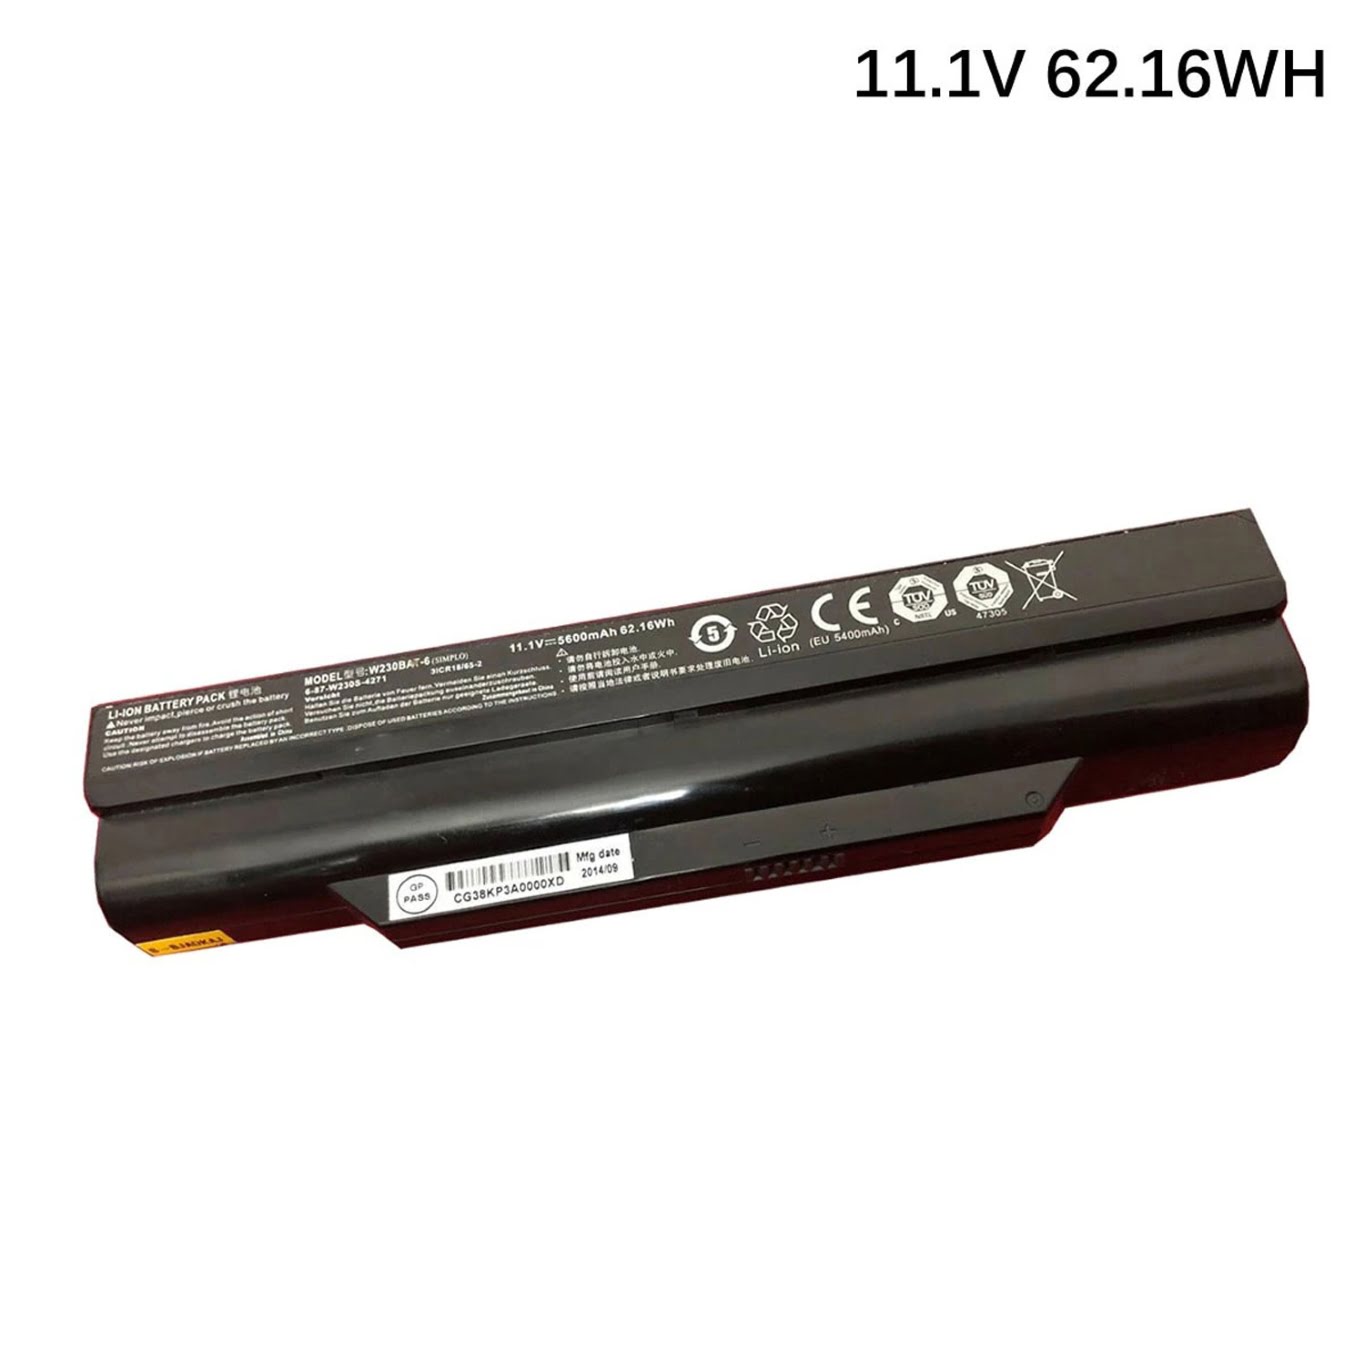 3ICR18/65/-2, 6-87-W230S-4271 replacement Laptop Battery for Clevo W230, W230SD, 11.1V, 5600mAh / 62.16Wh, 6 cells